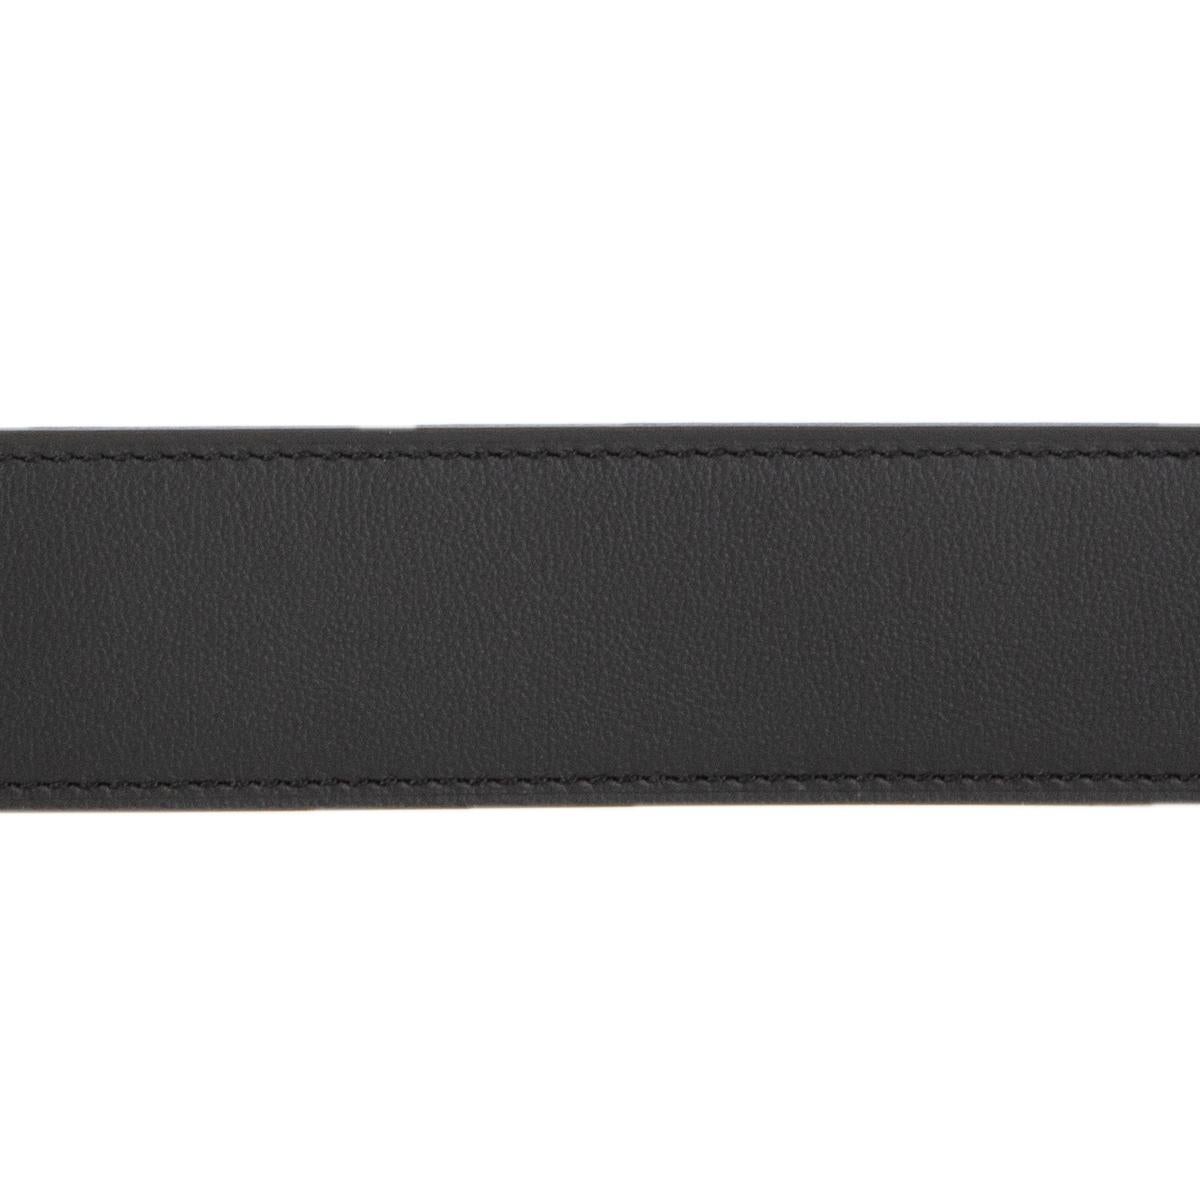 Hermes 38mm reversible belt strap in Noir (black) Veau Chamonix and Bleu Electrique Veau Togo leather. Brand new. Comes with box.

Tag Size 95
Width 3.8cm (1.5in)
Fits 92cm (35.9in) to 97cm (37.8in)
